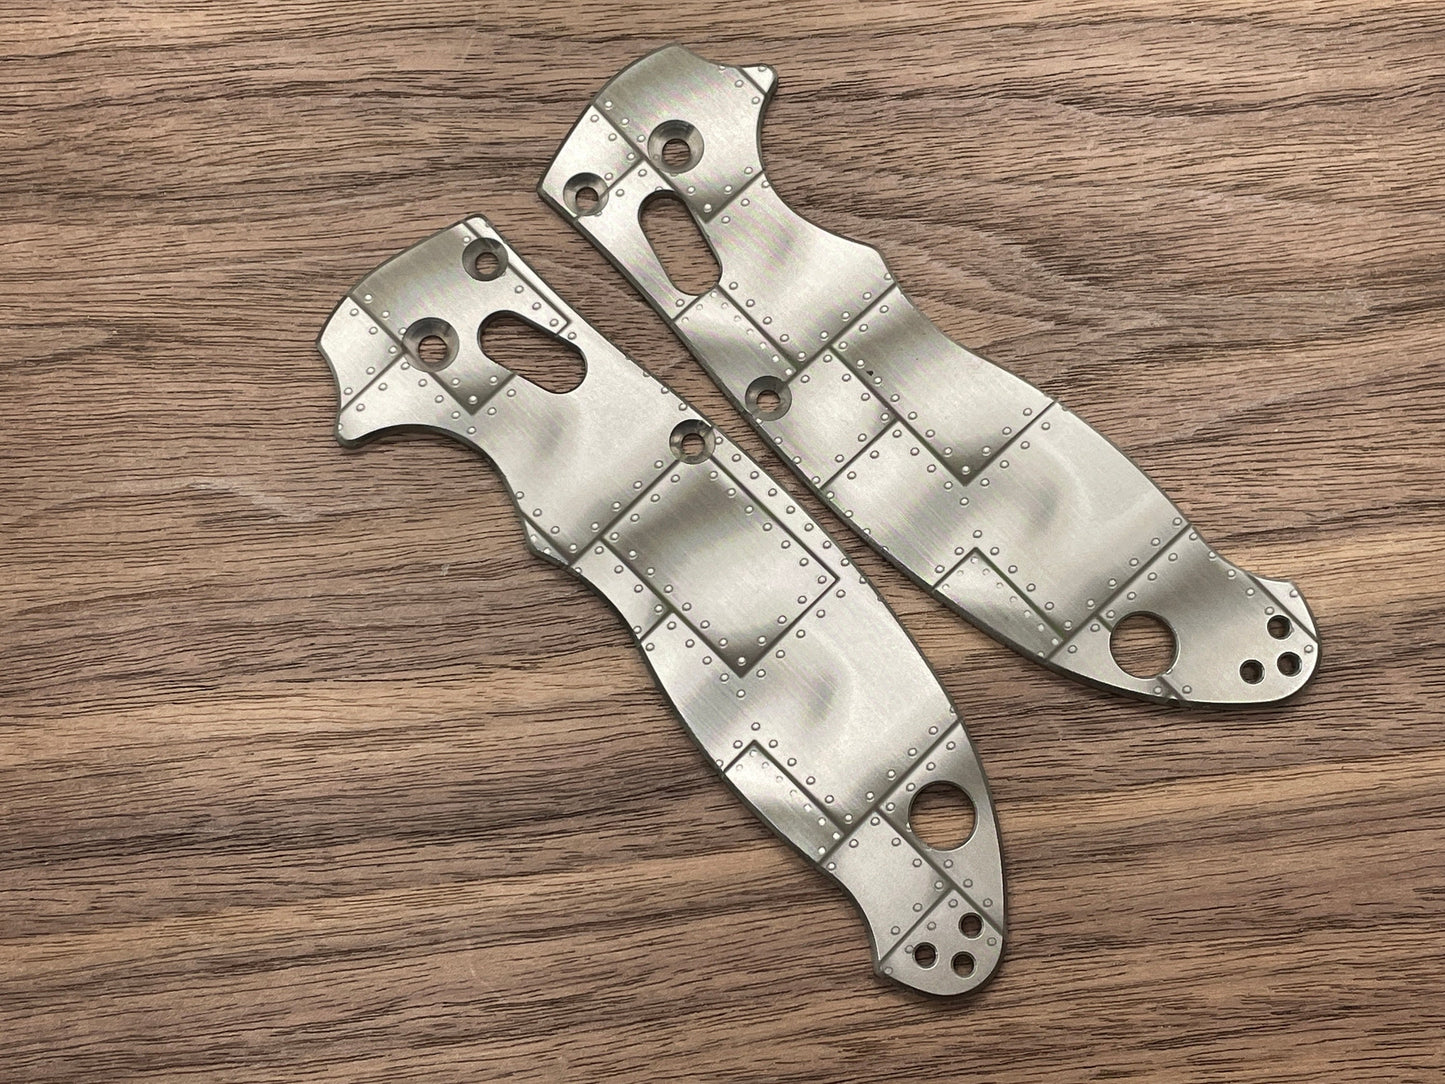 RIVETED engraved Titanium scales for Spyderco MANIX 2